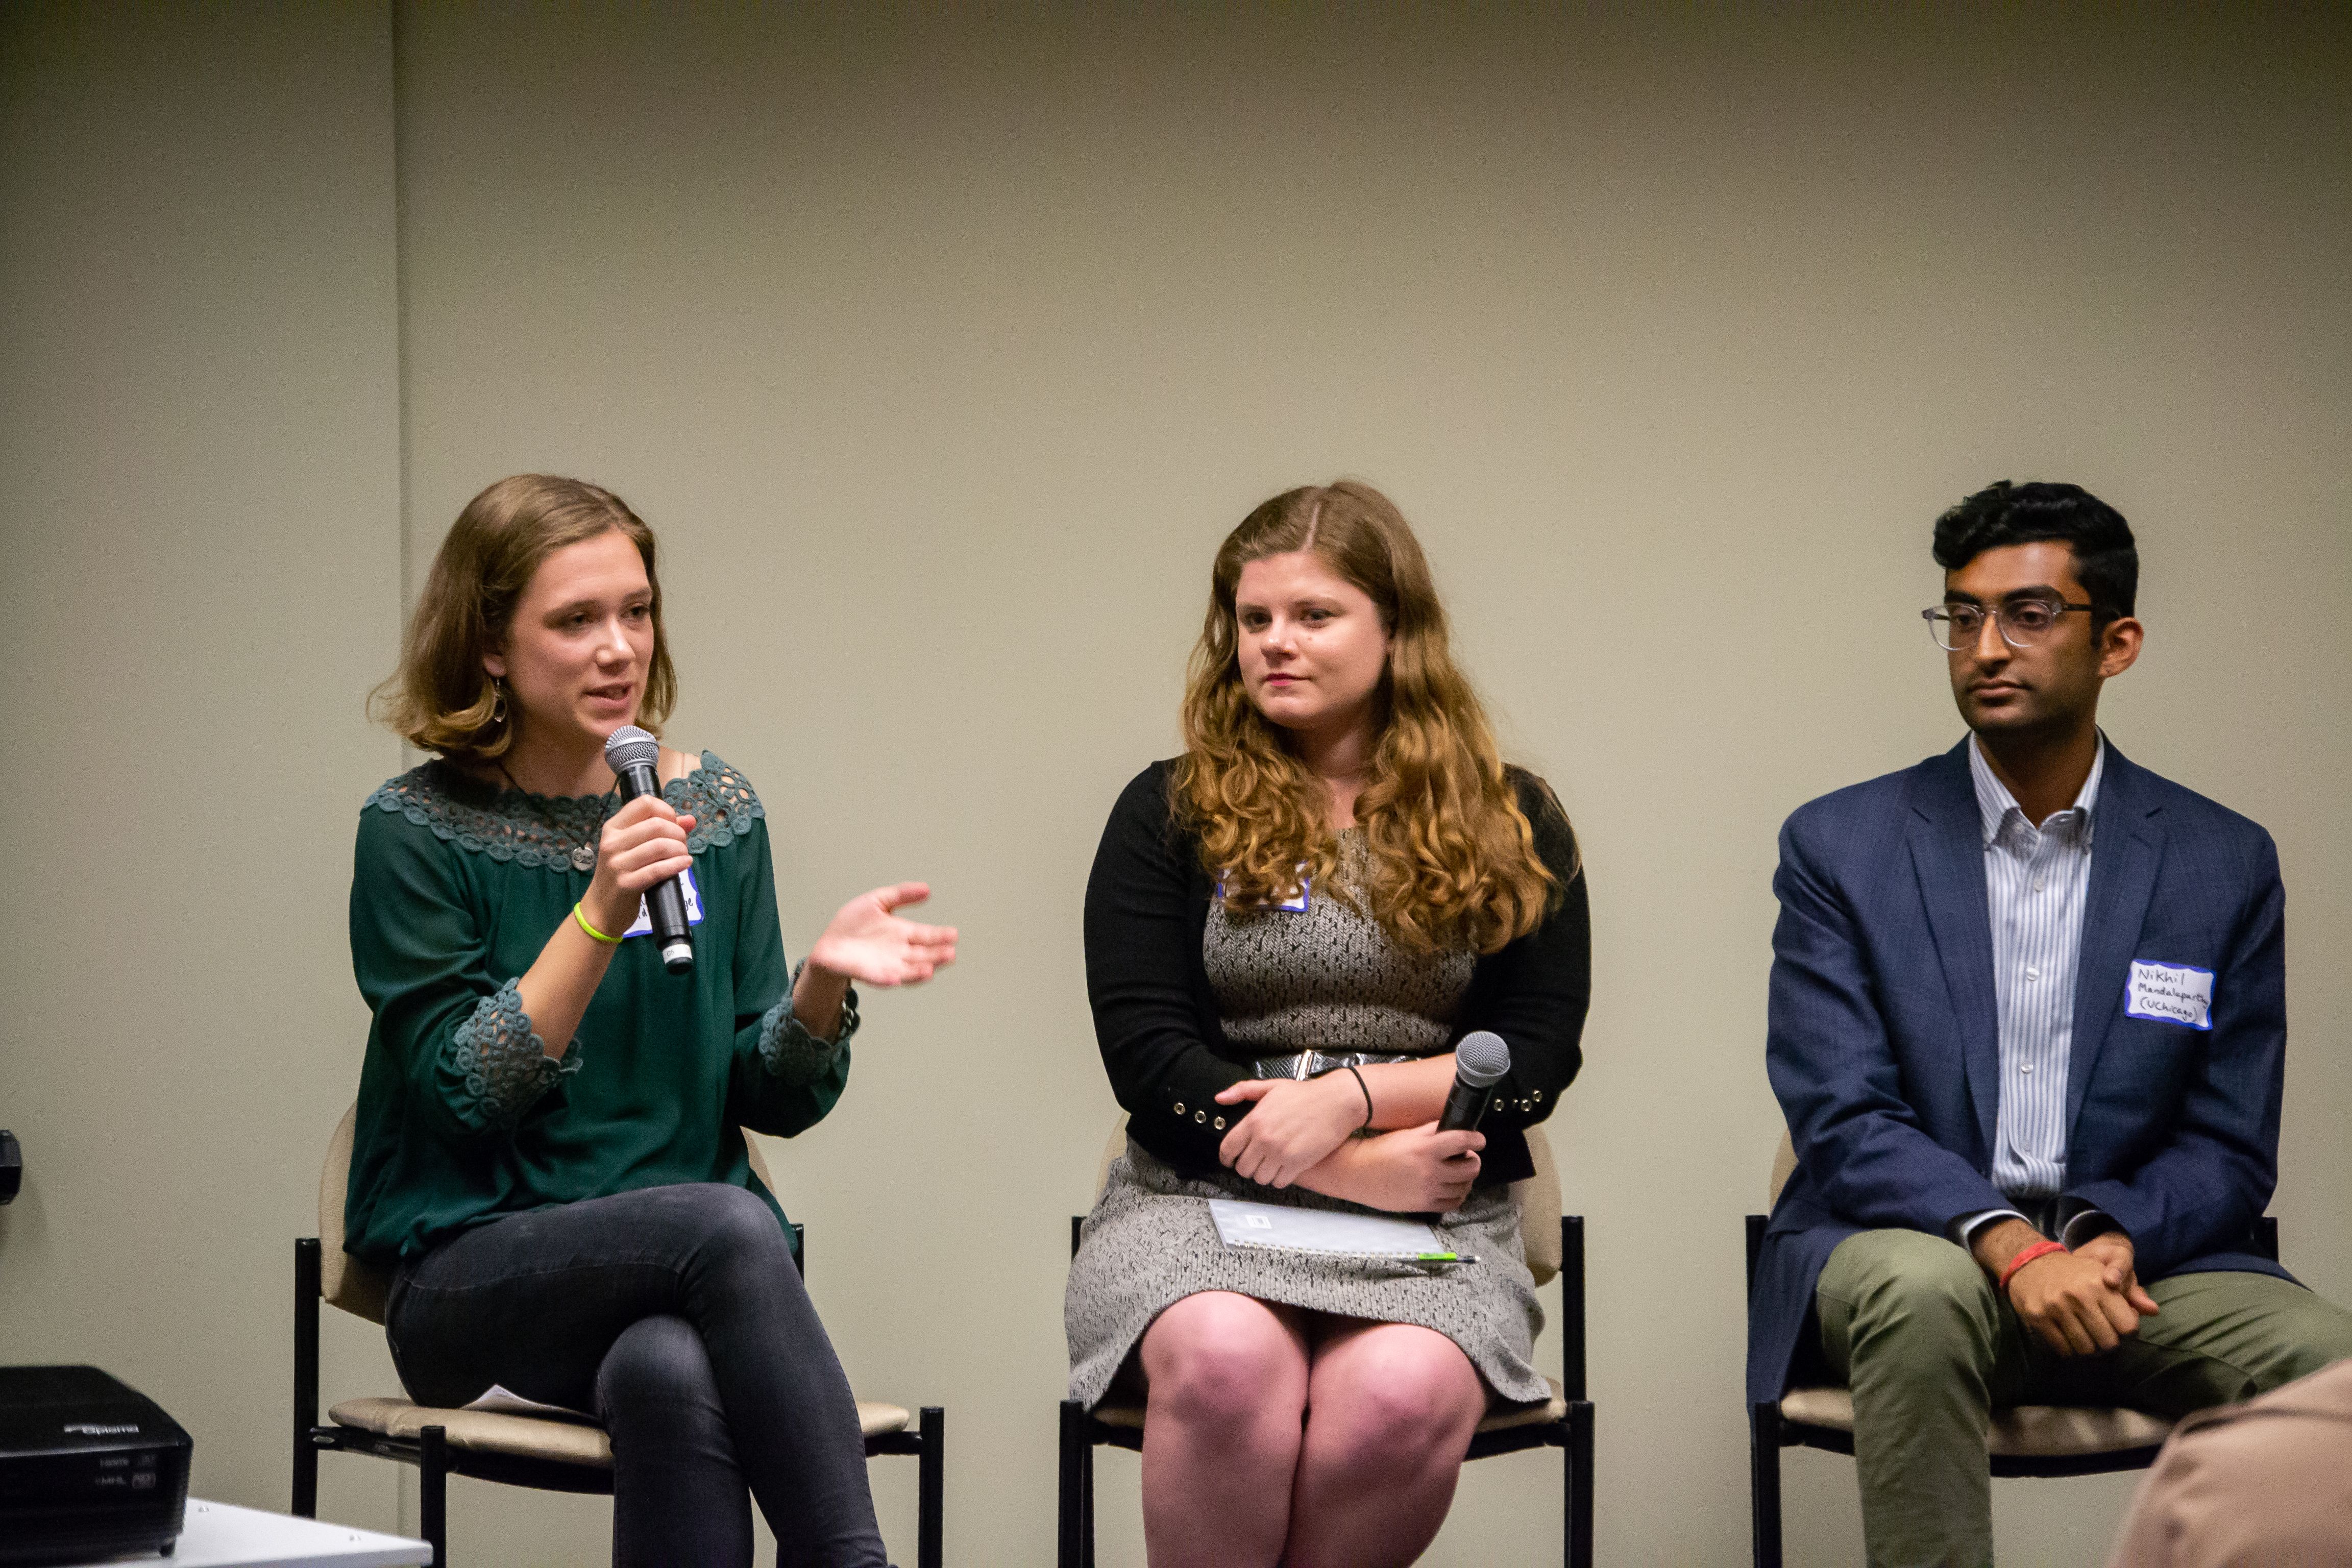 Catherine Cartier (Davidson College) responds to an audience question during the "Impact of Religion" Q&A session alongside fellow panelists Kaitlyn Johnson (Georgetown University) and Nikhil Mandalaparthy (University of Chicago). Image by Nora Moraga-Lewy. United States, 2019.